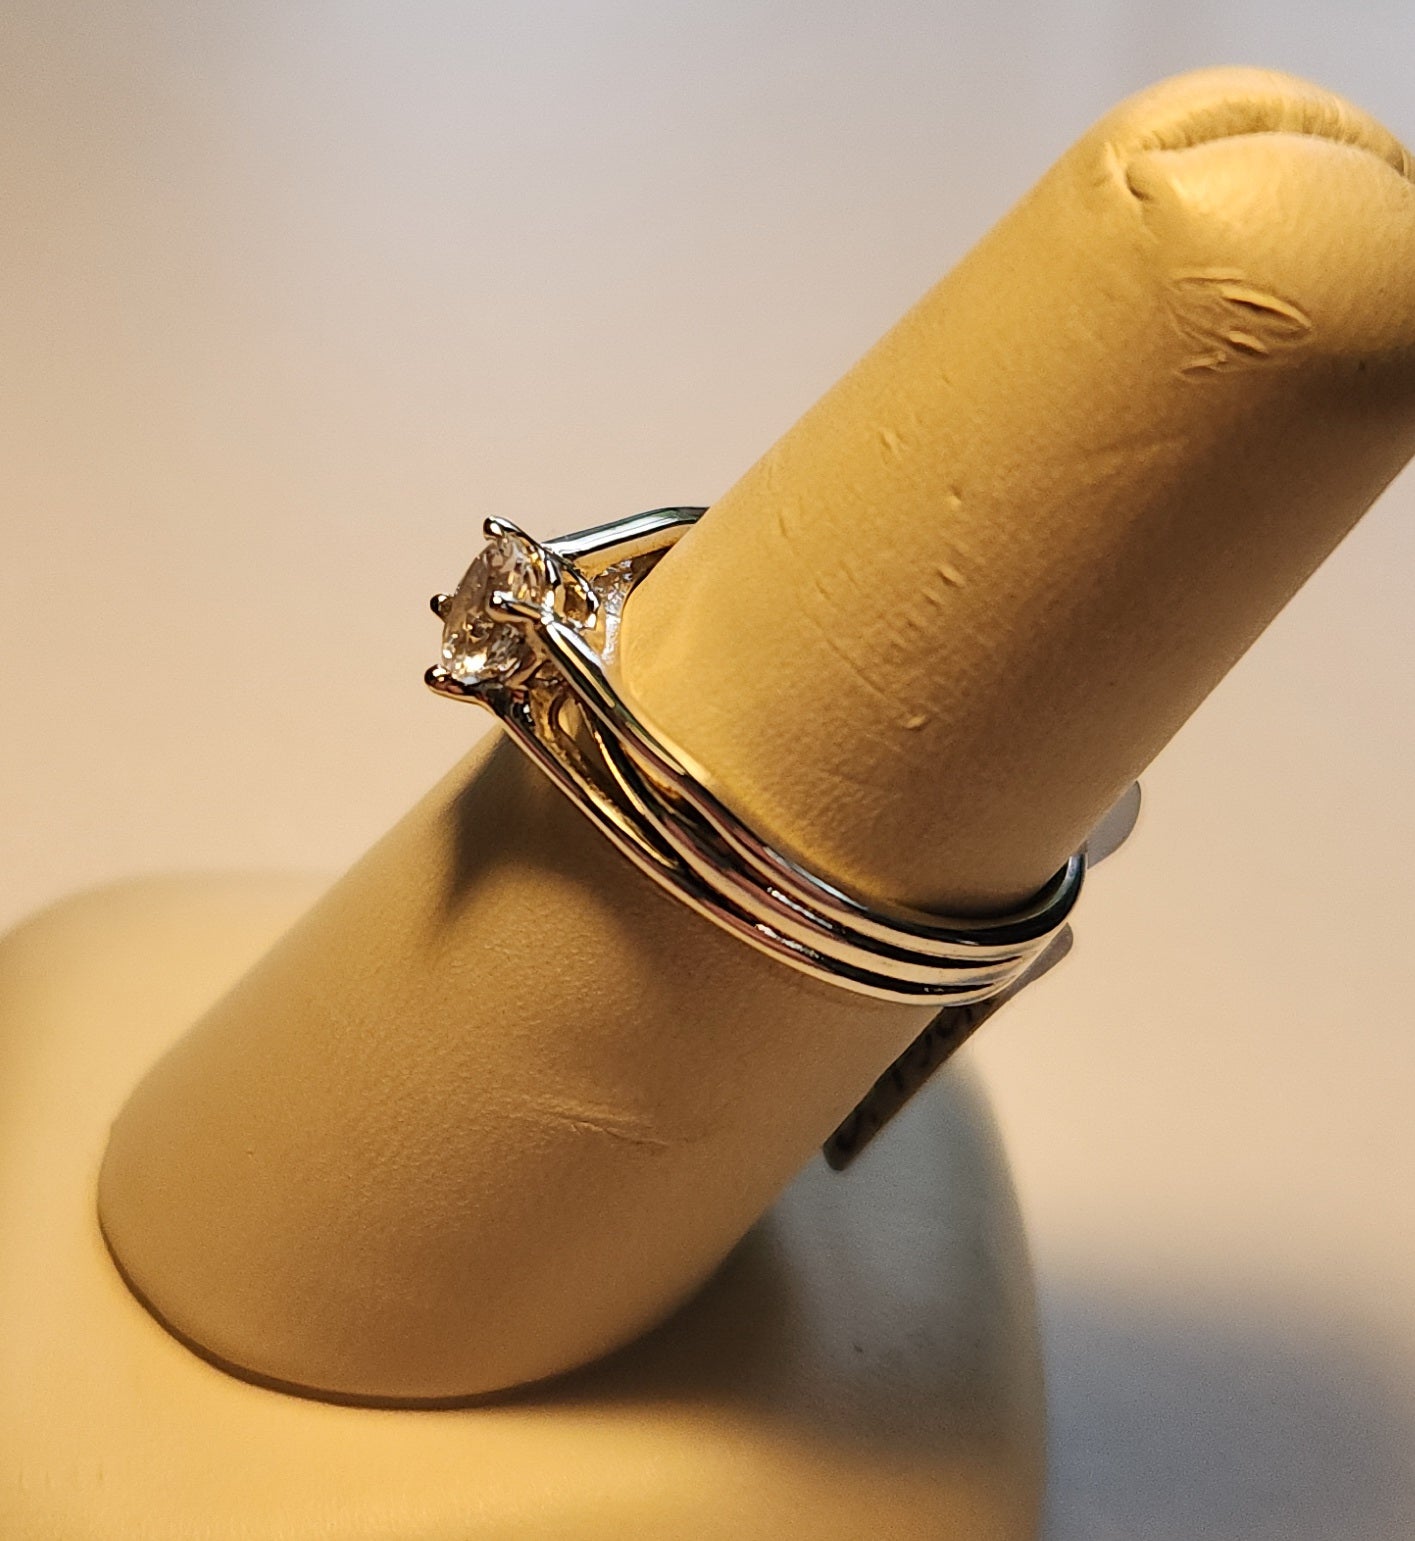 0.45ct Mason County clear star brilliant cut topaz mounted in a sterling silver ring with a 14kt white gold head.